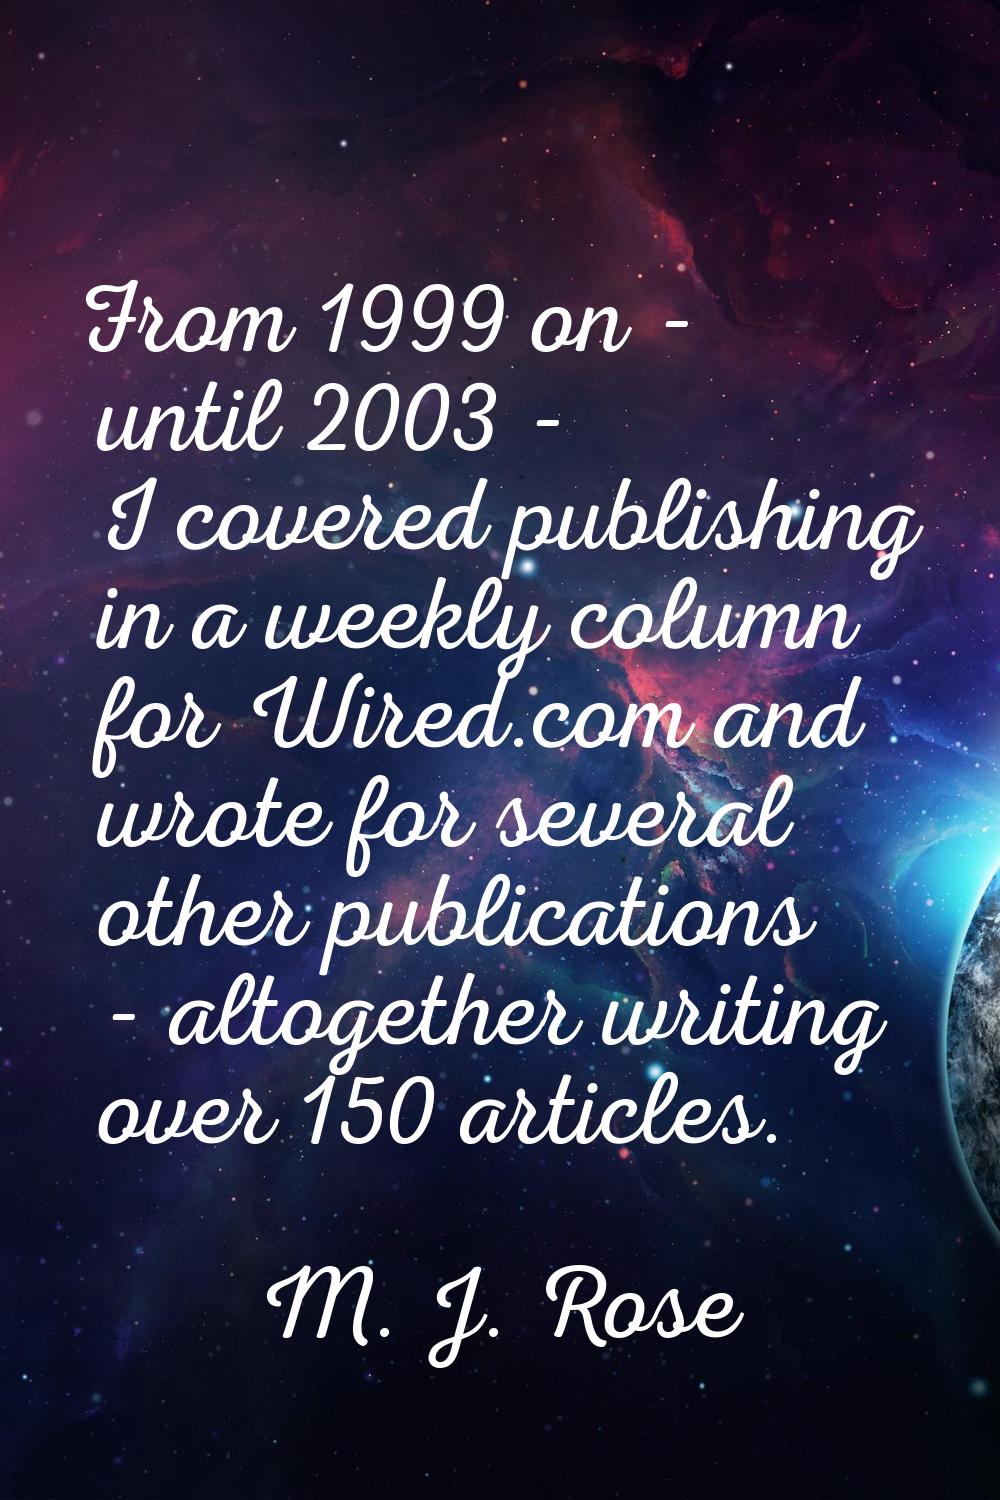 From 1999 on - until 2003 - I covered publishing in a weekly column for Wired.com and wrote for sev